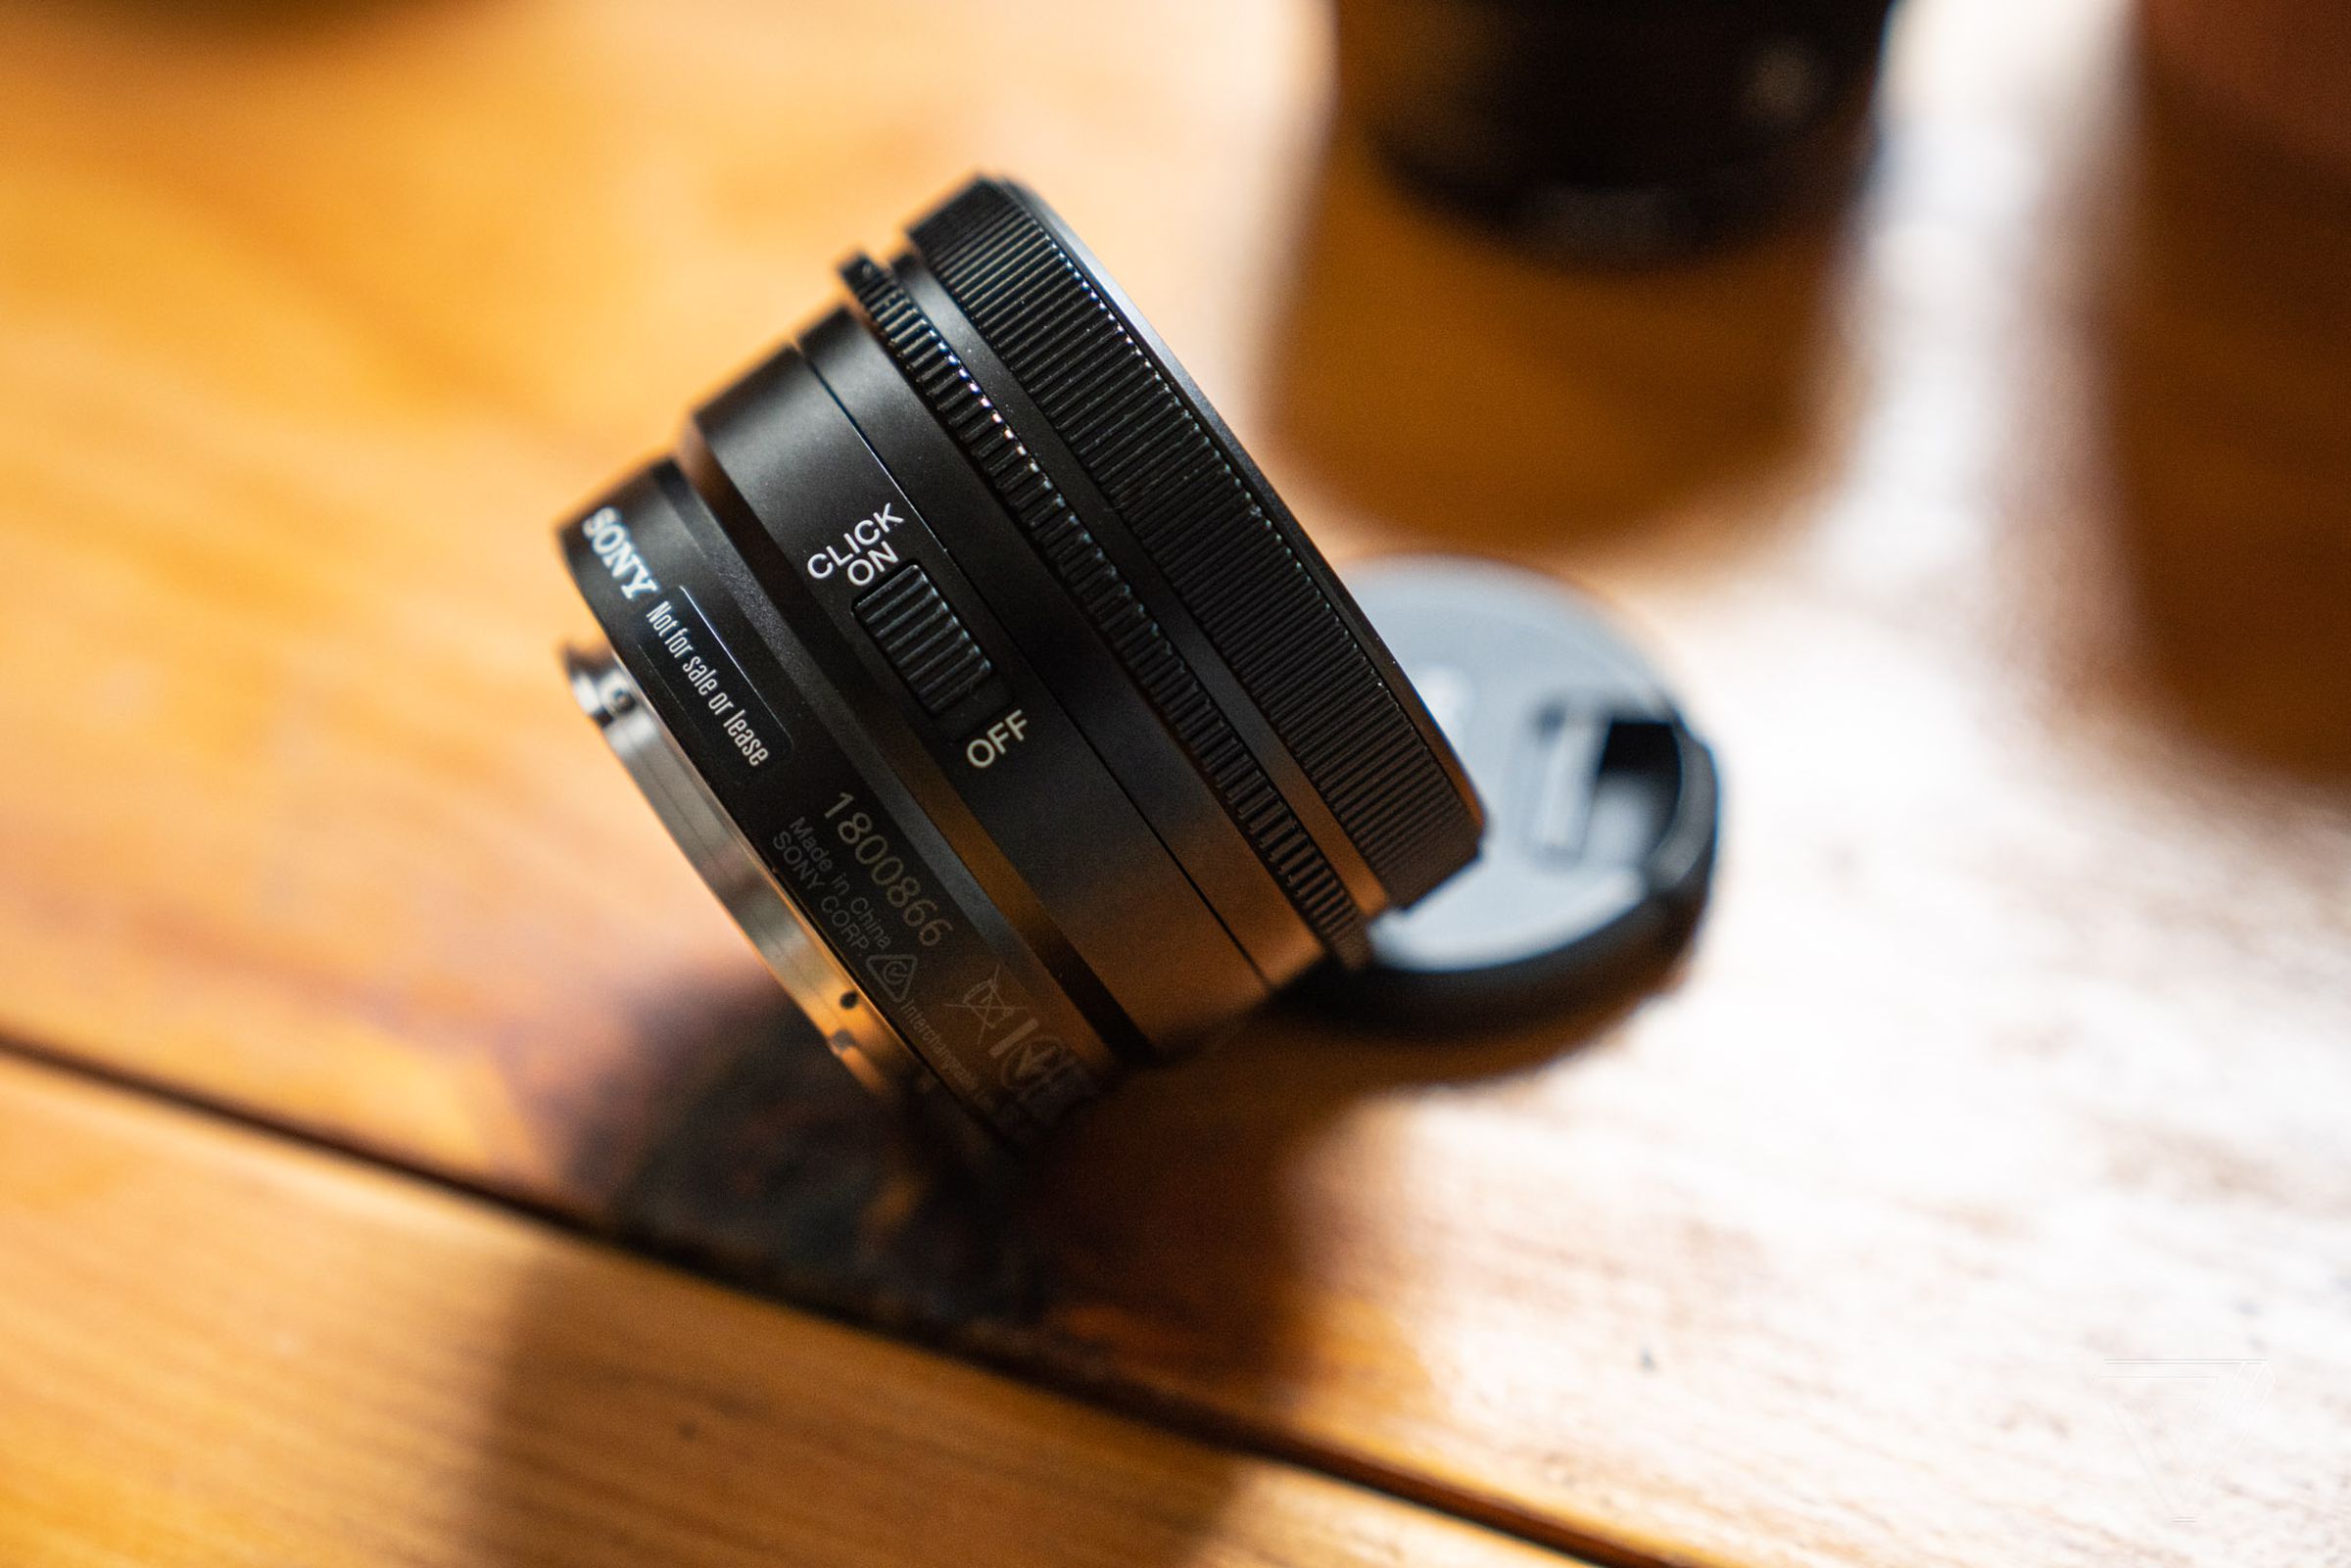 There is an aperture click switch on the right-hand side of each lens.